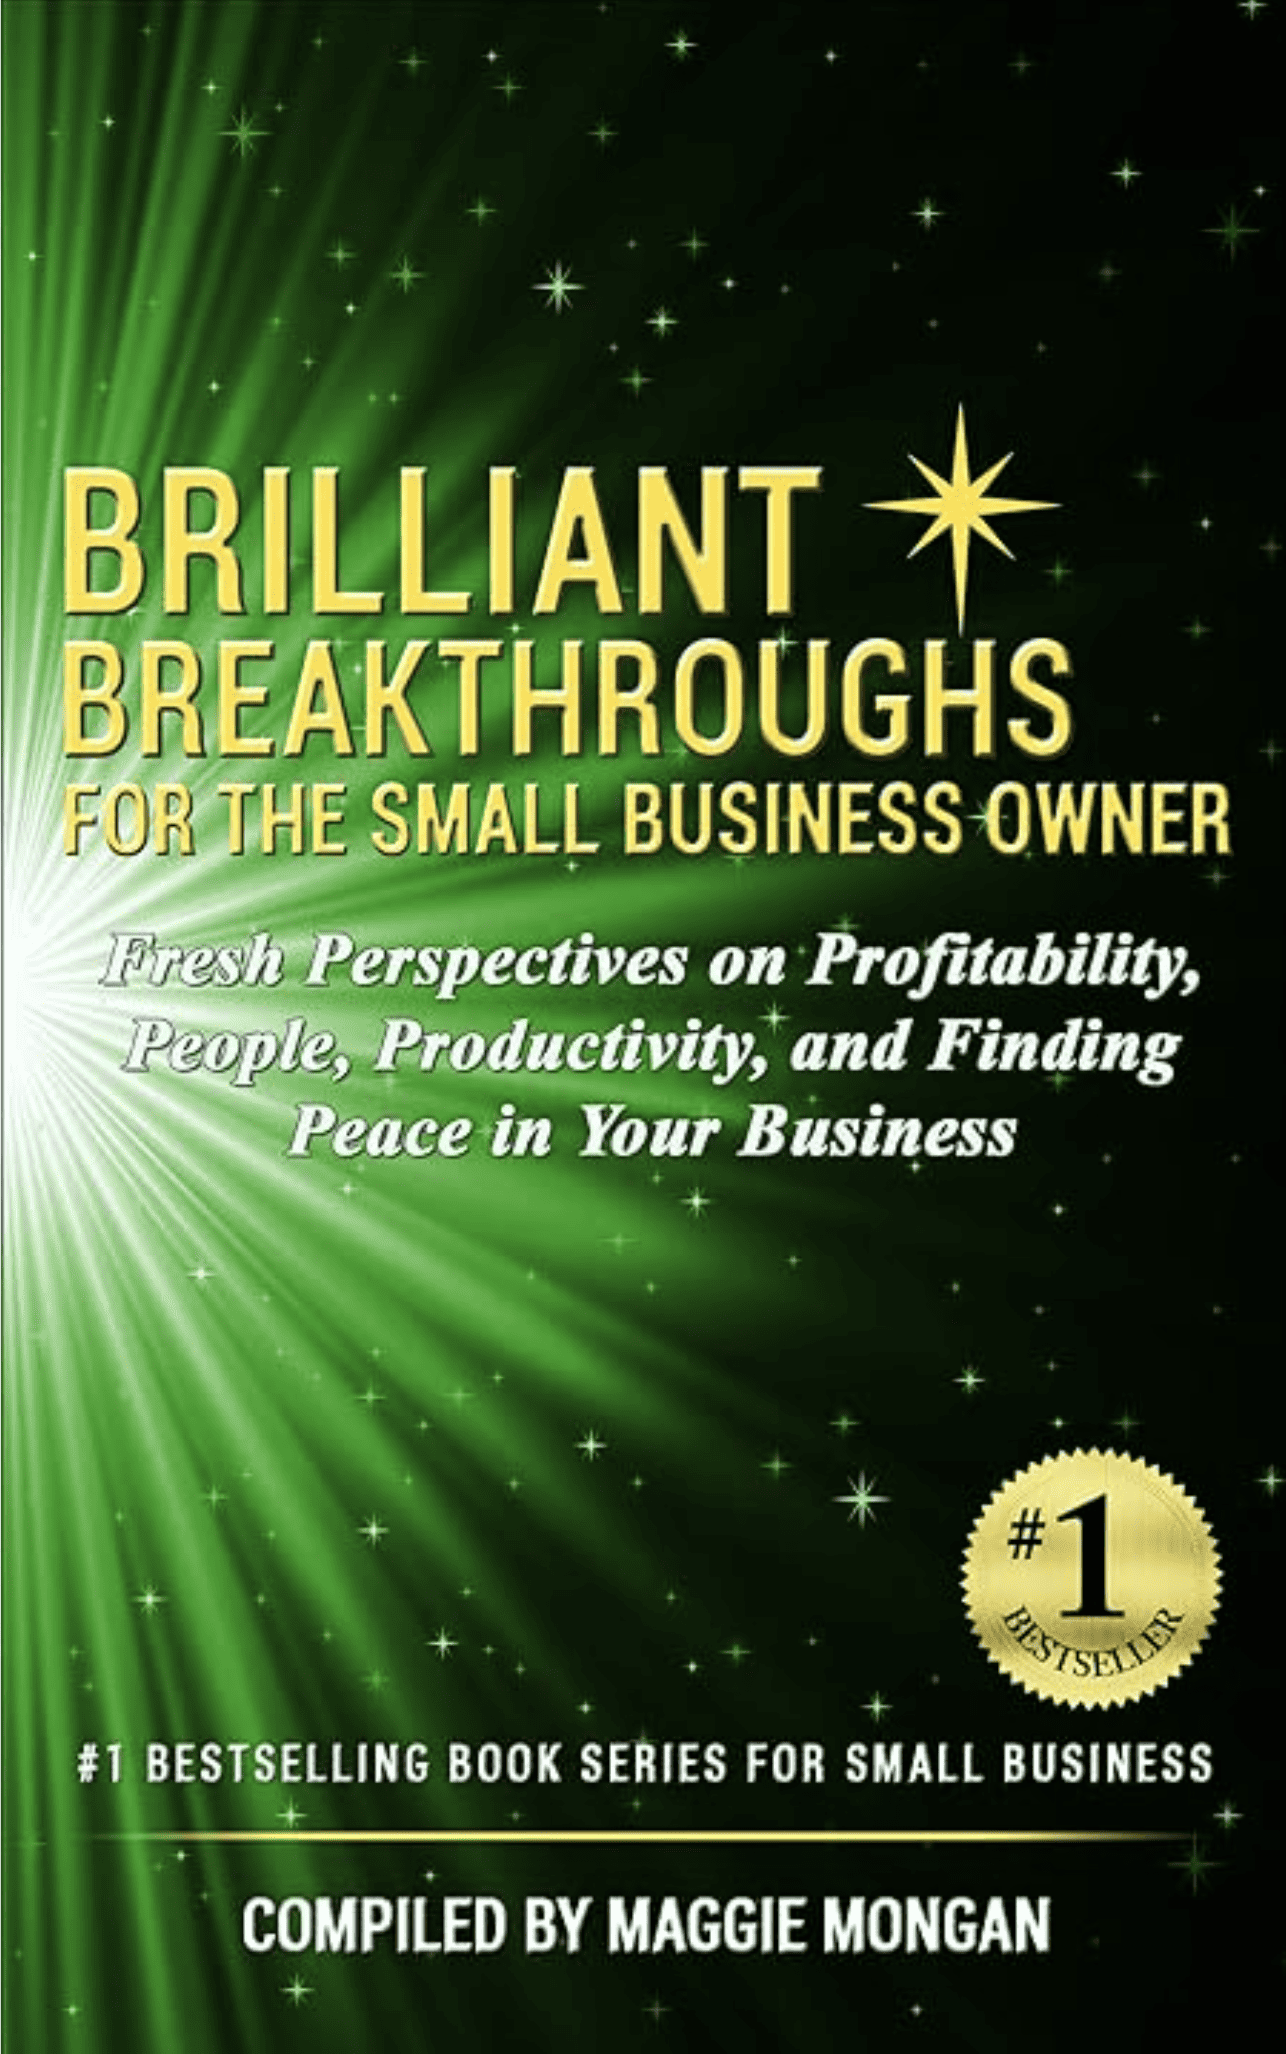 Brilliant Breakthroughs for the small business owner book cover